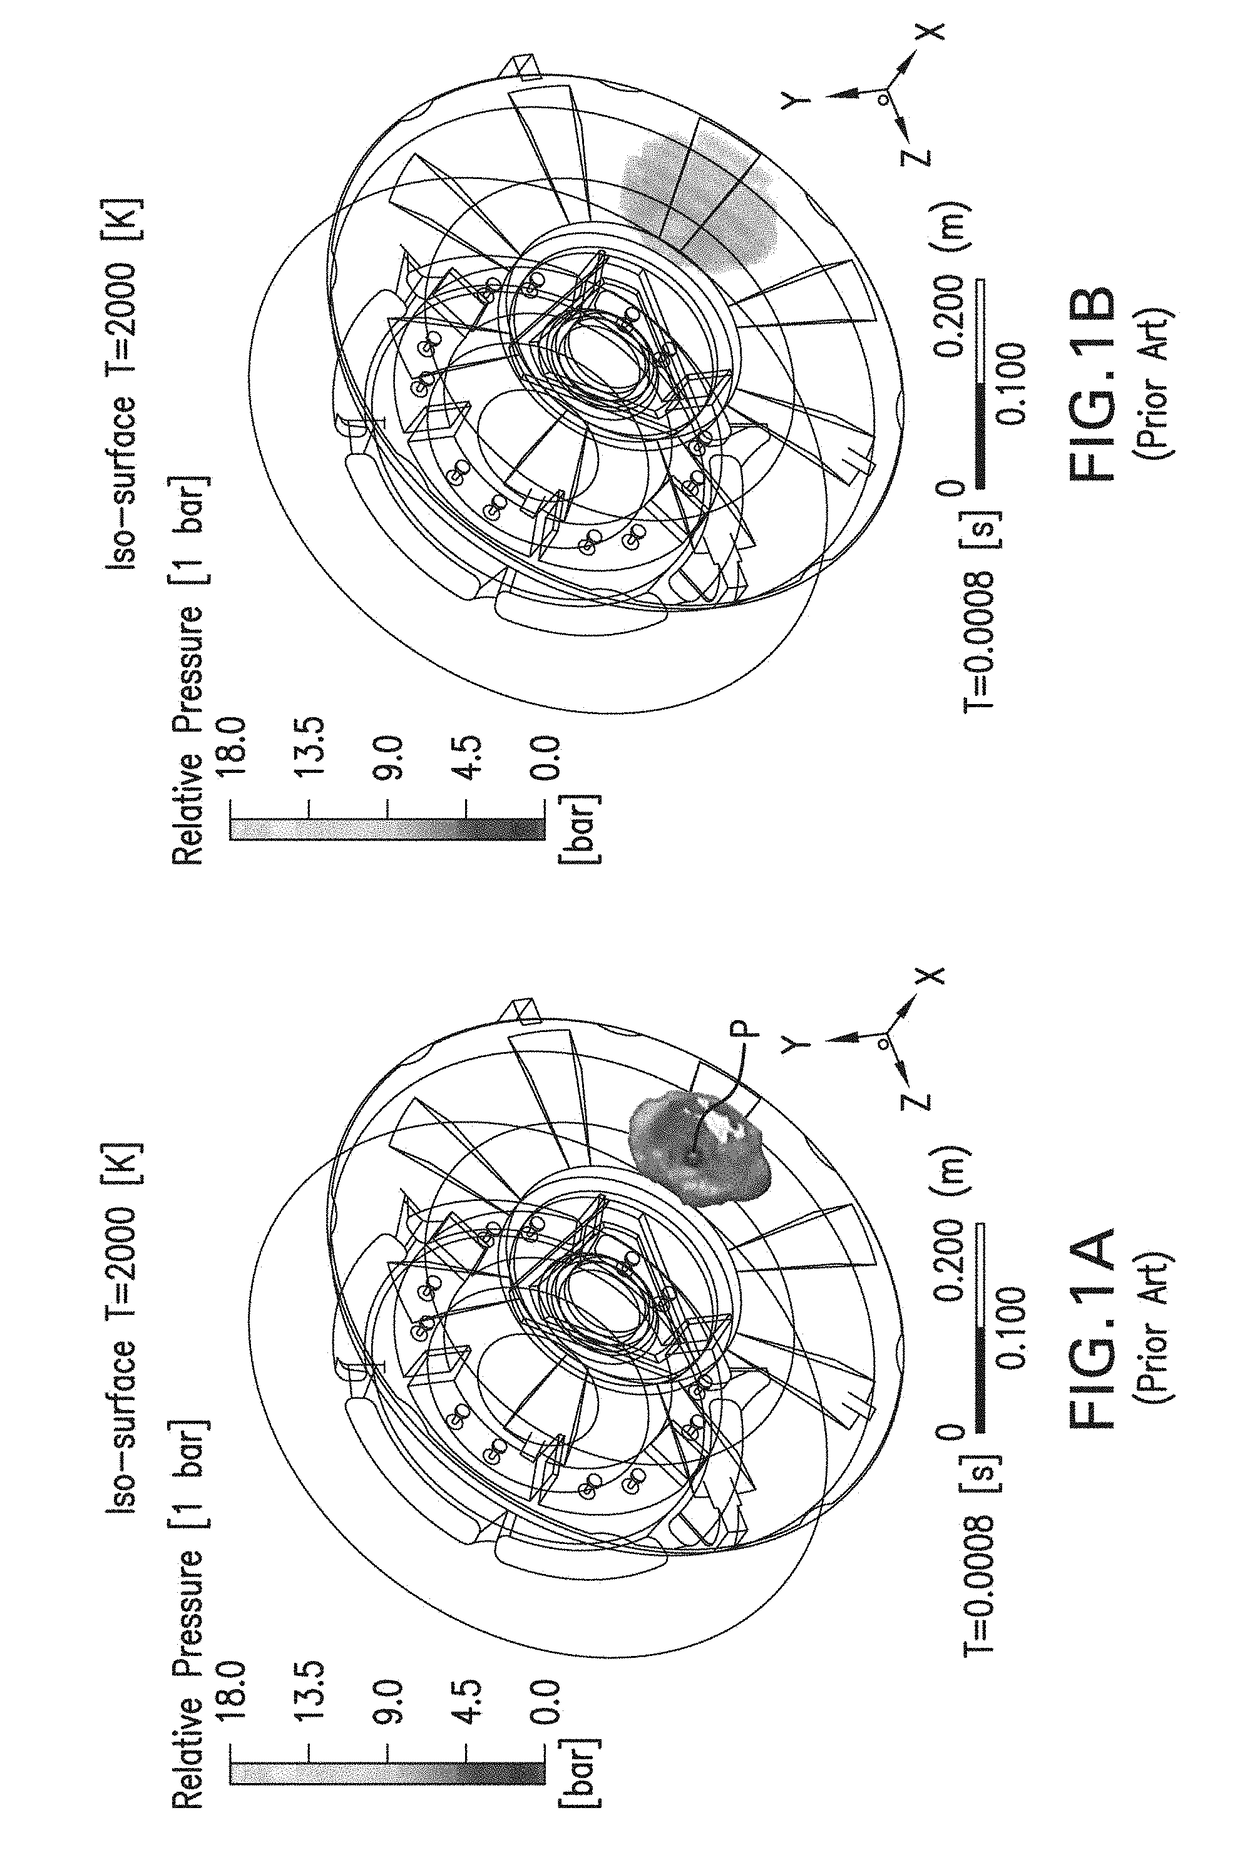 Internal pressure attenuator device for rotating electrical machines able to operate in explosive atmospheres